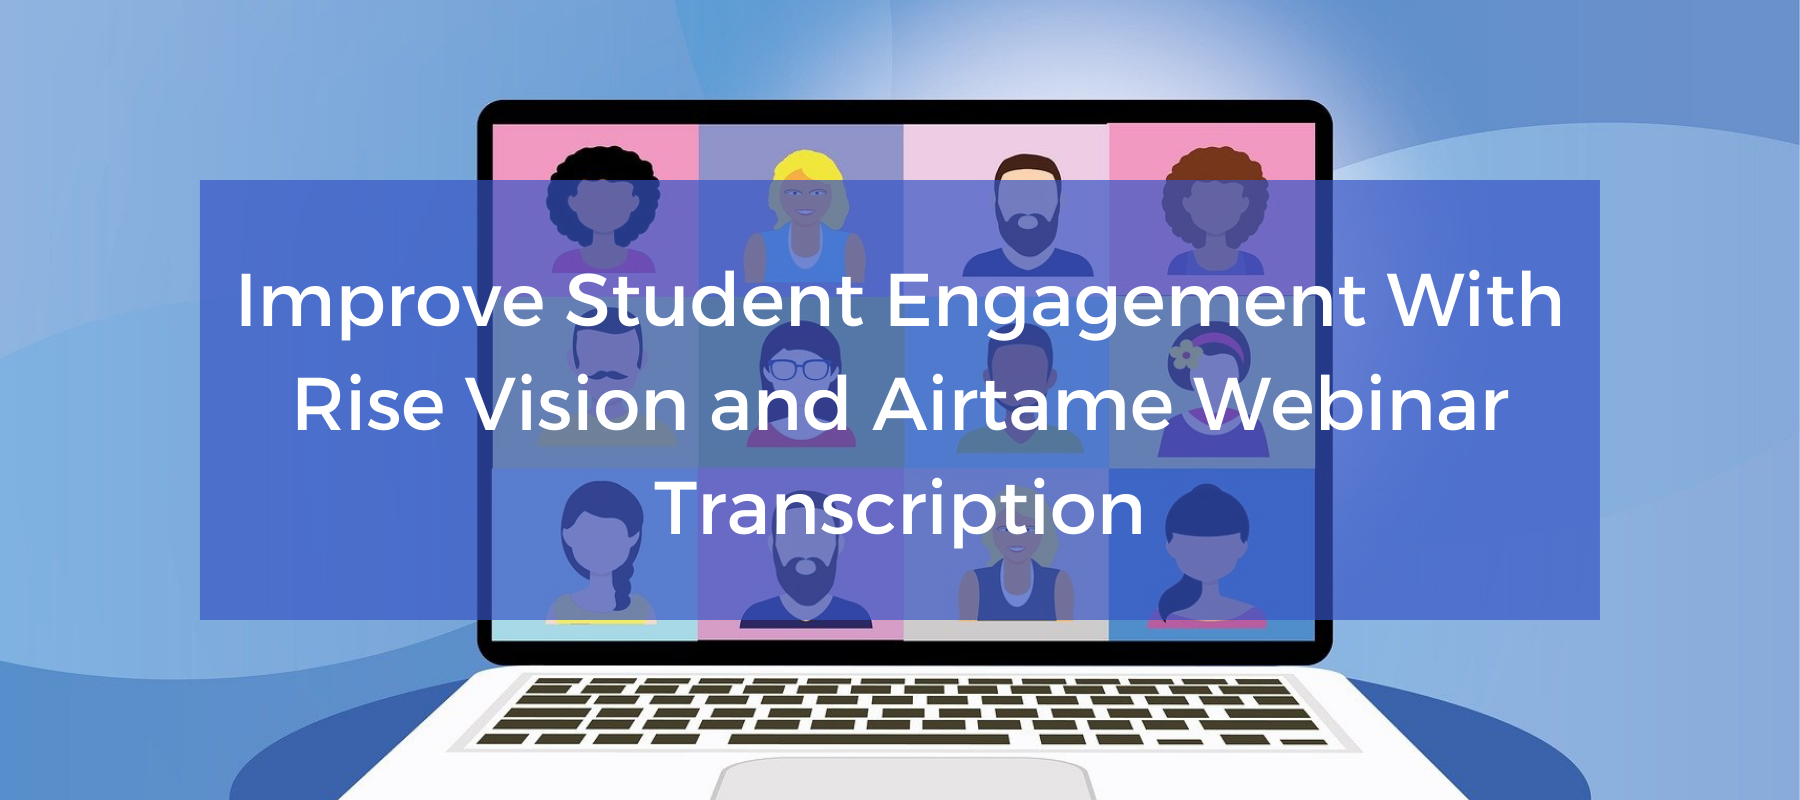 Improve Student Engagement With Rise Vision and Airtame Webinar Transcription featured.